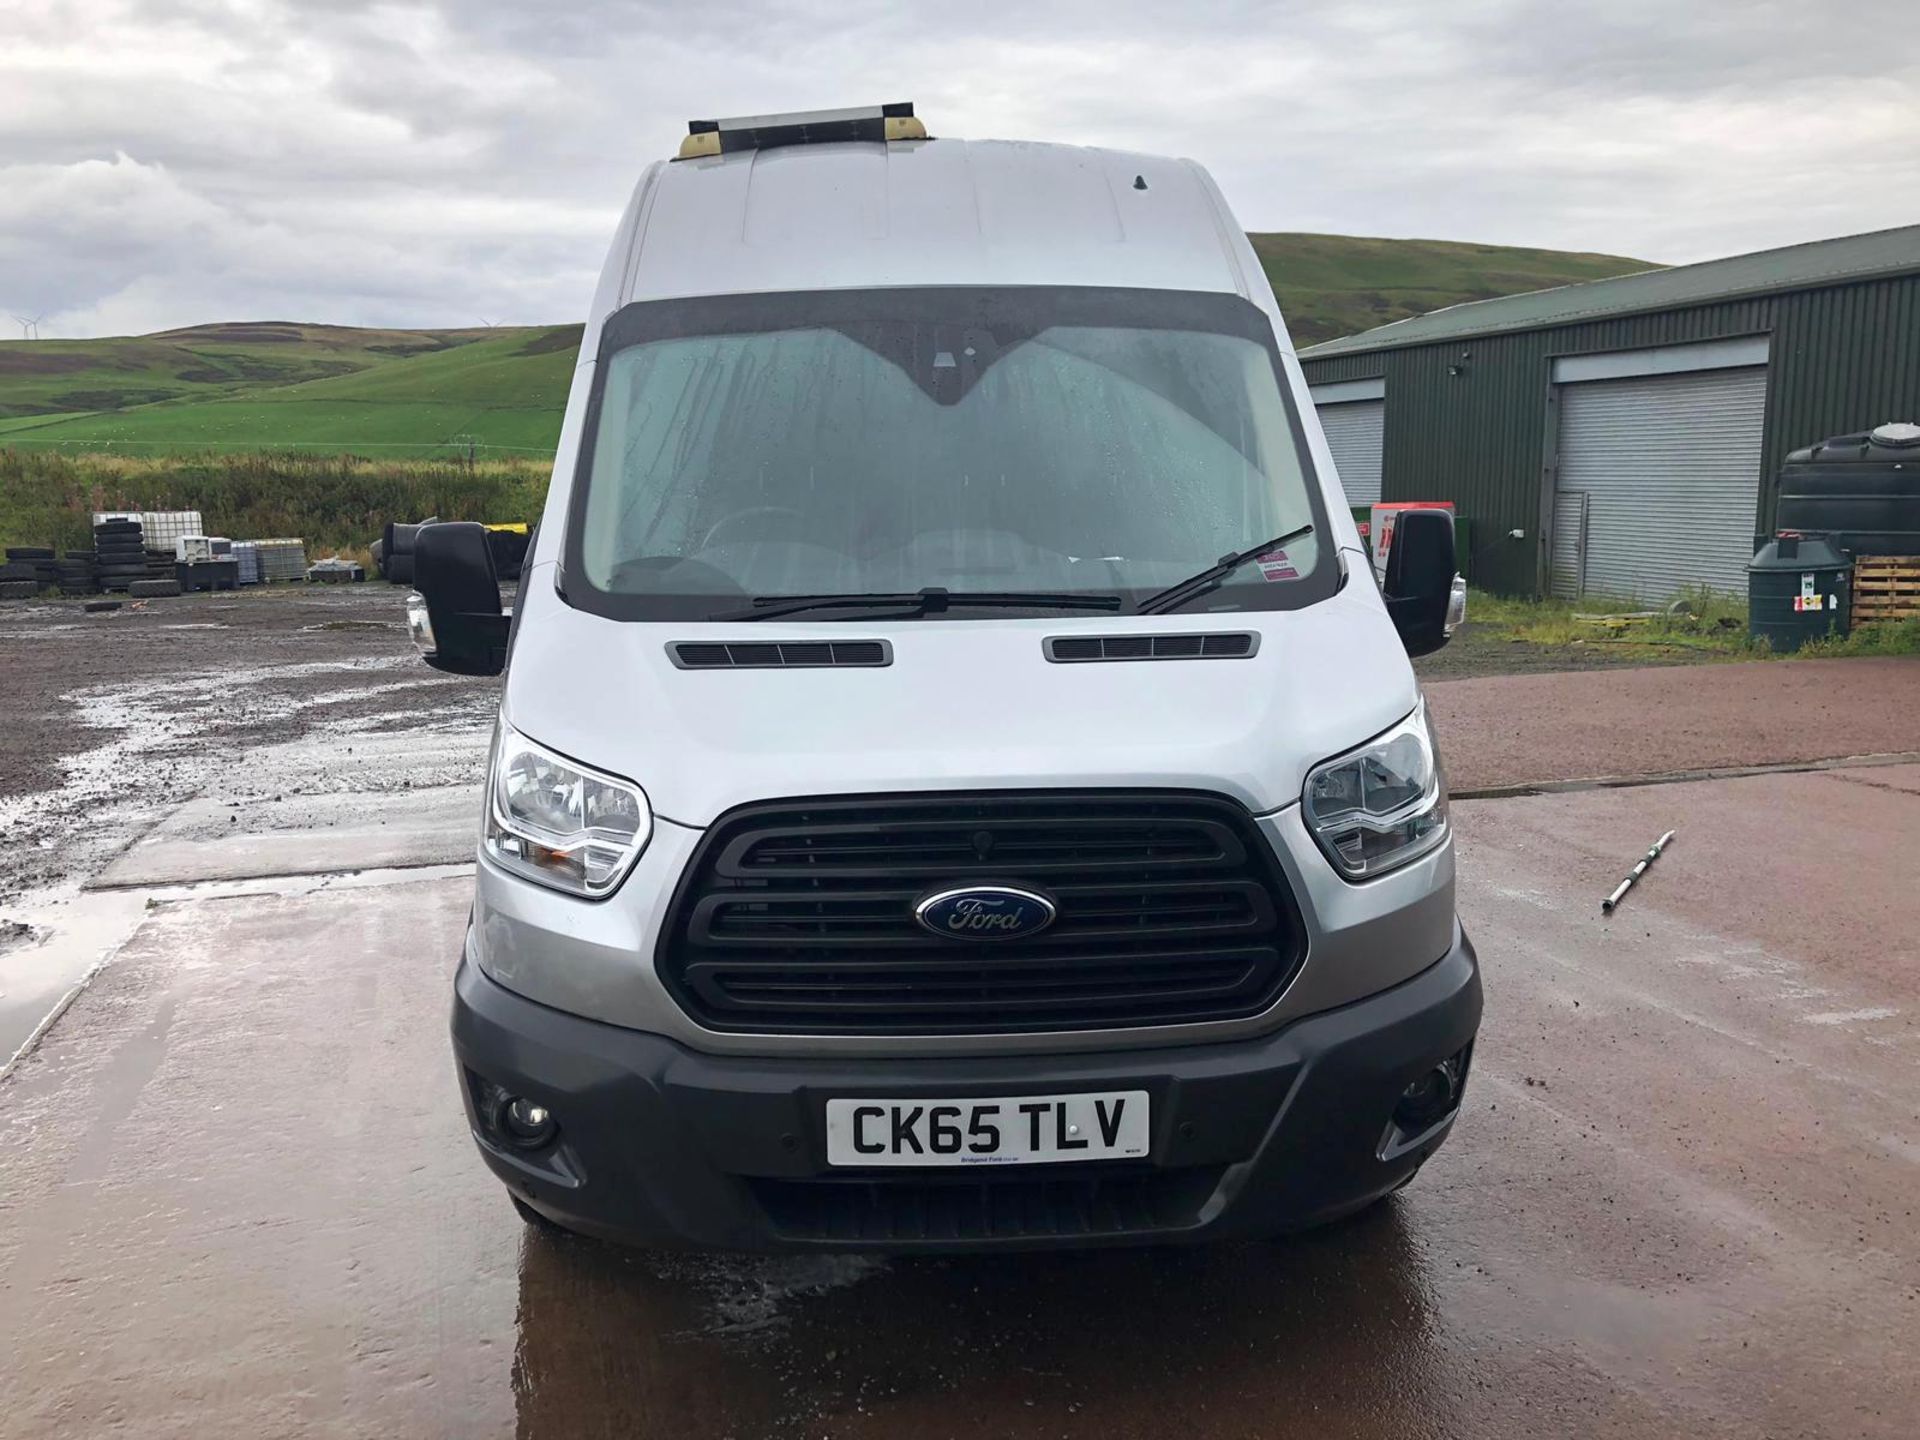 Extra Lot - Ford TRANSIT 350 2.2 TDCi 155PS EURO 5 FOUR WHEEL DRIVE HIGH ROOF UNIQUE TRAVELLING WORK - Image 2 of 33